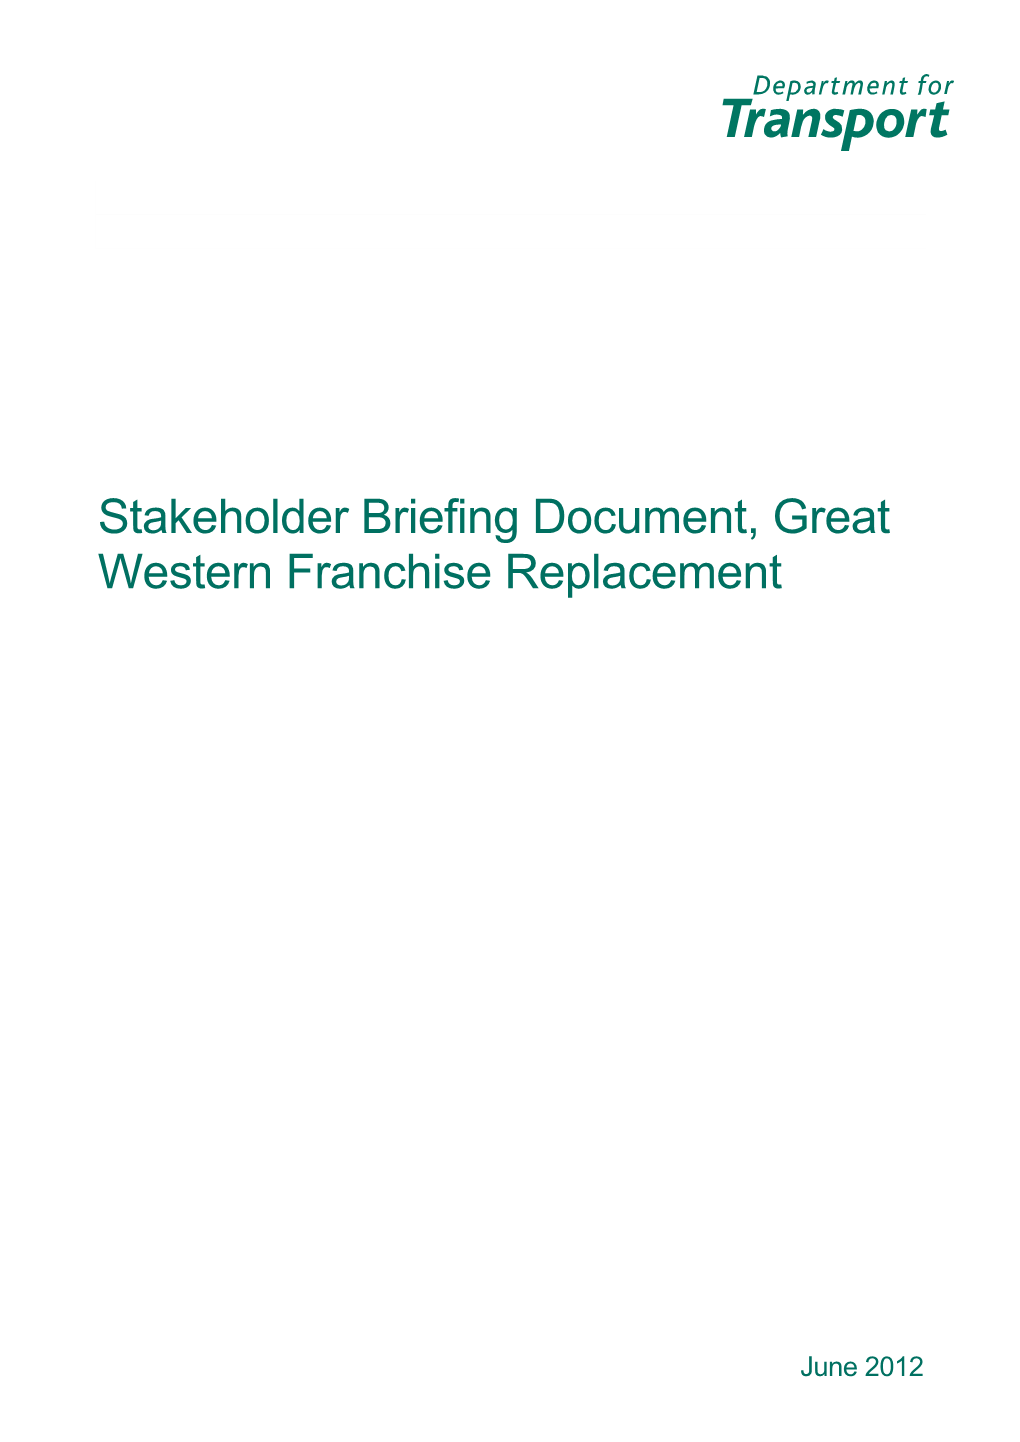 Stakeholder Briefing Document, Great Western Franchise Replacement